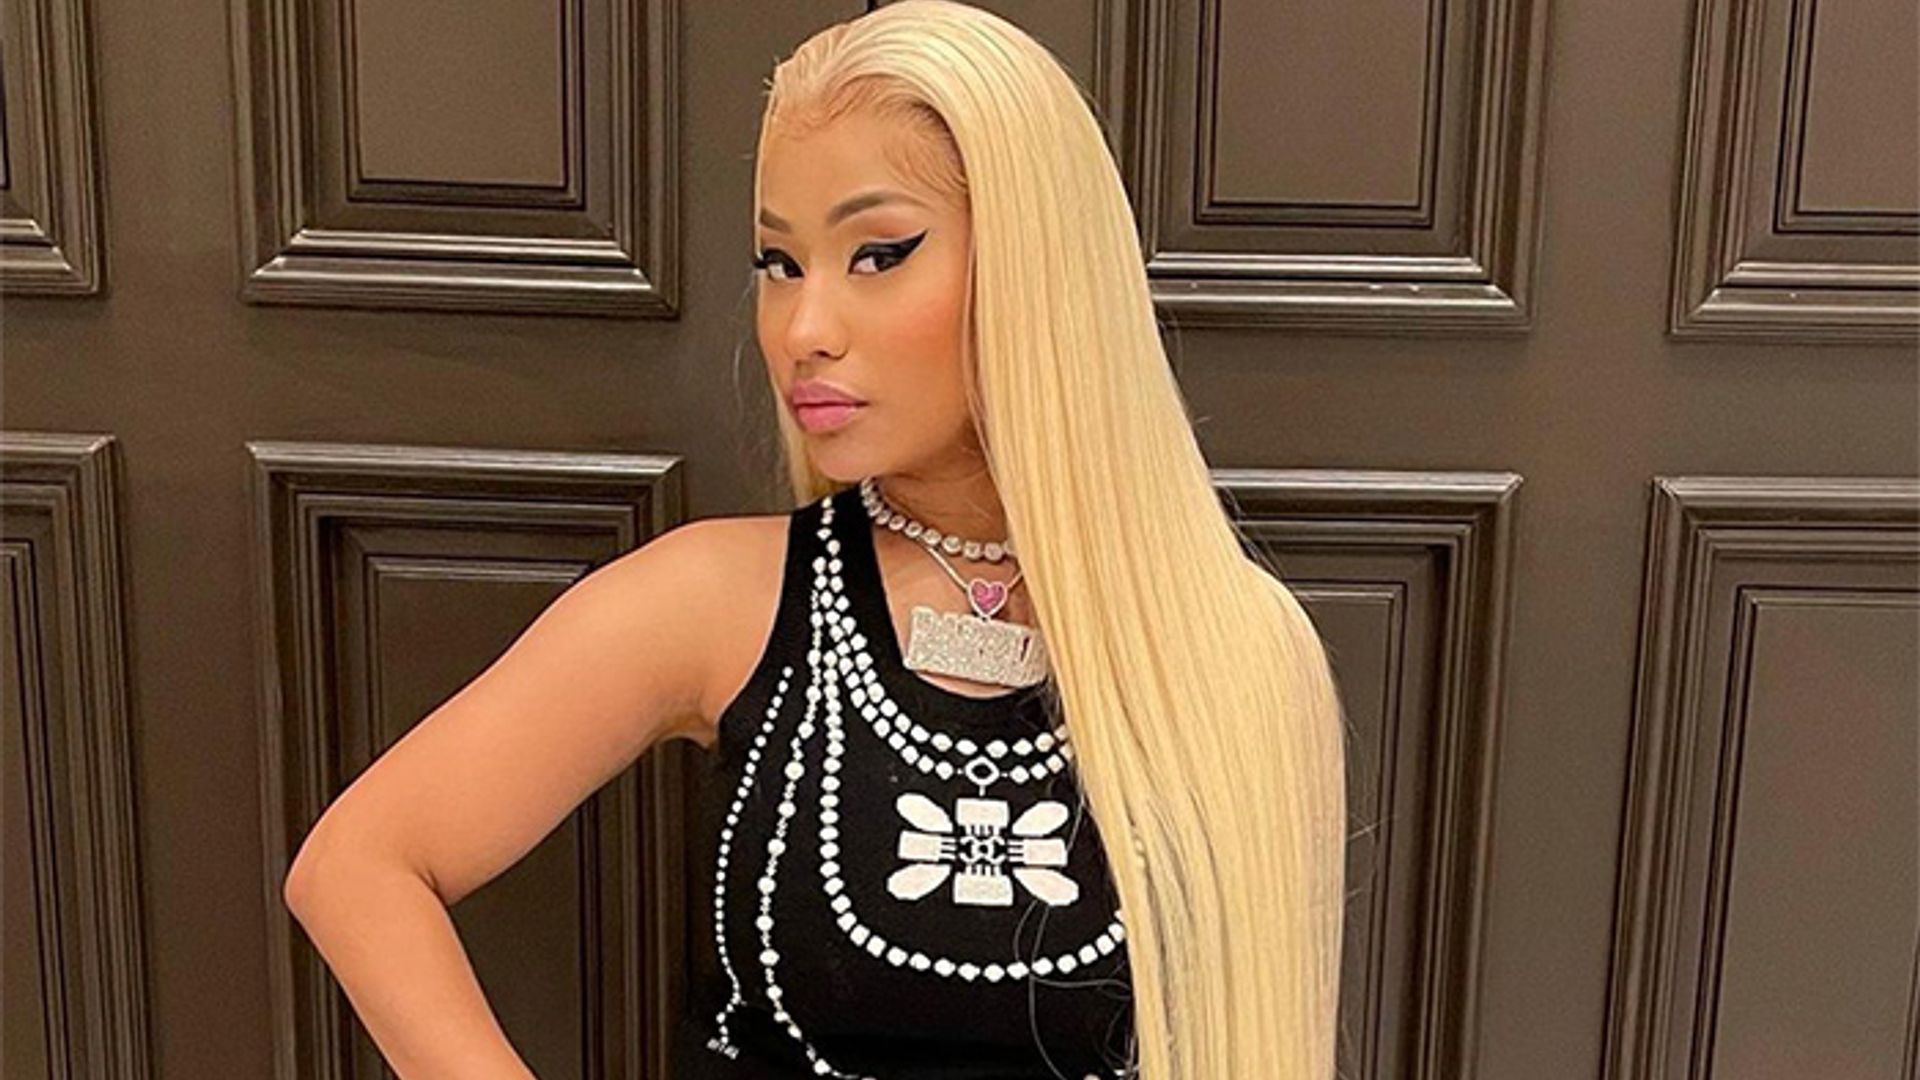 Nicki Minaj's before and after photos unearthed amid cosmetic surgery confession -  ‘I was fine just the way I was'